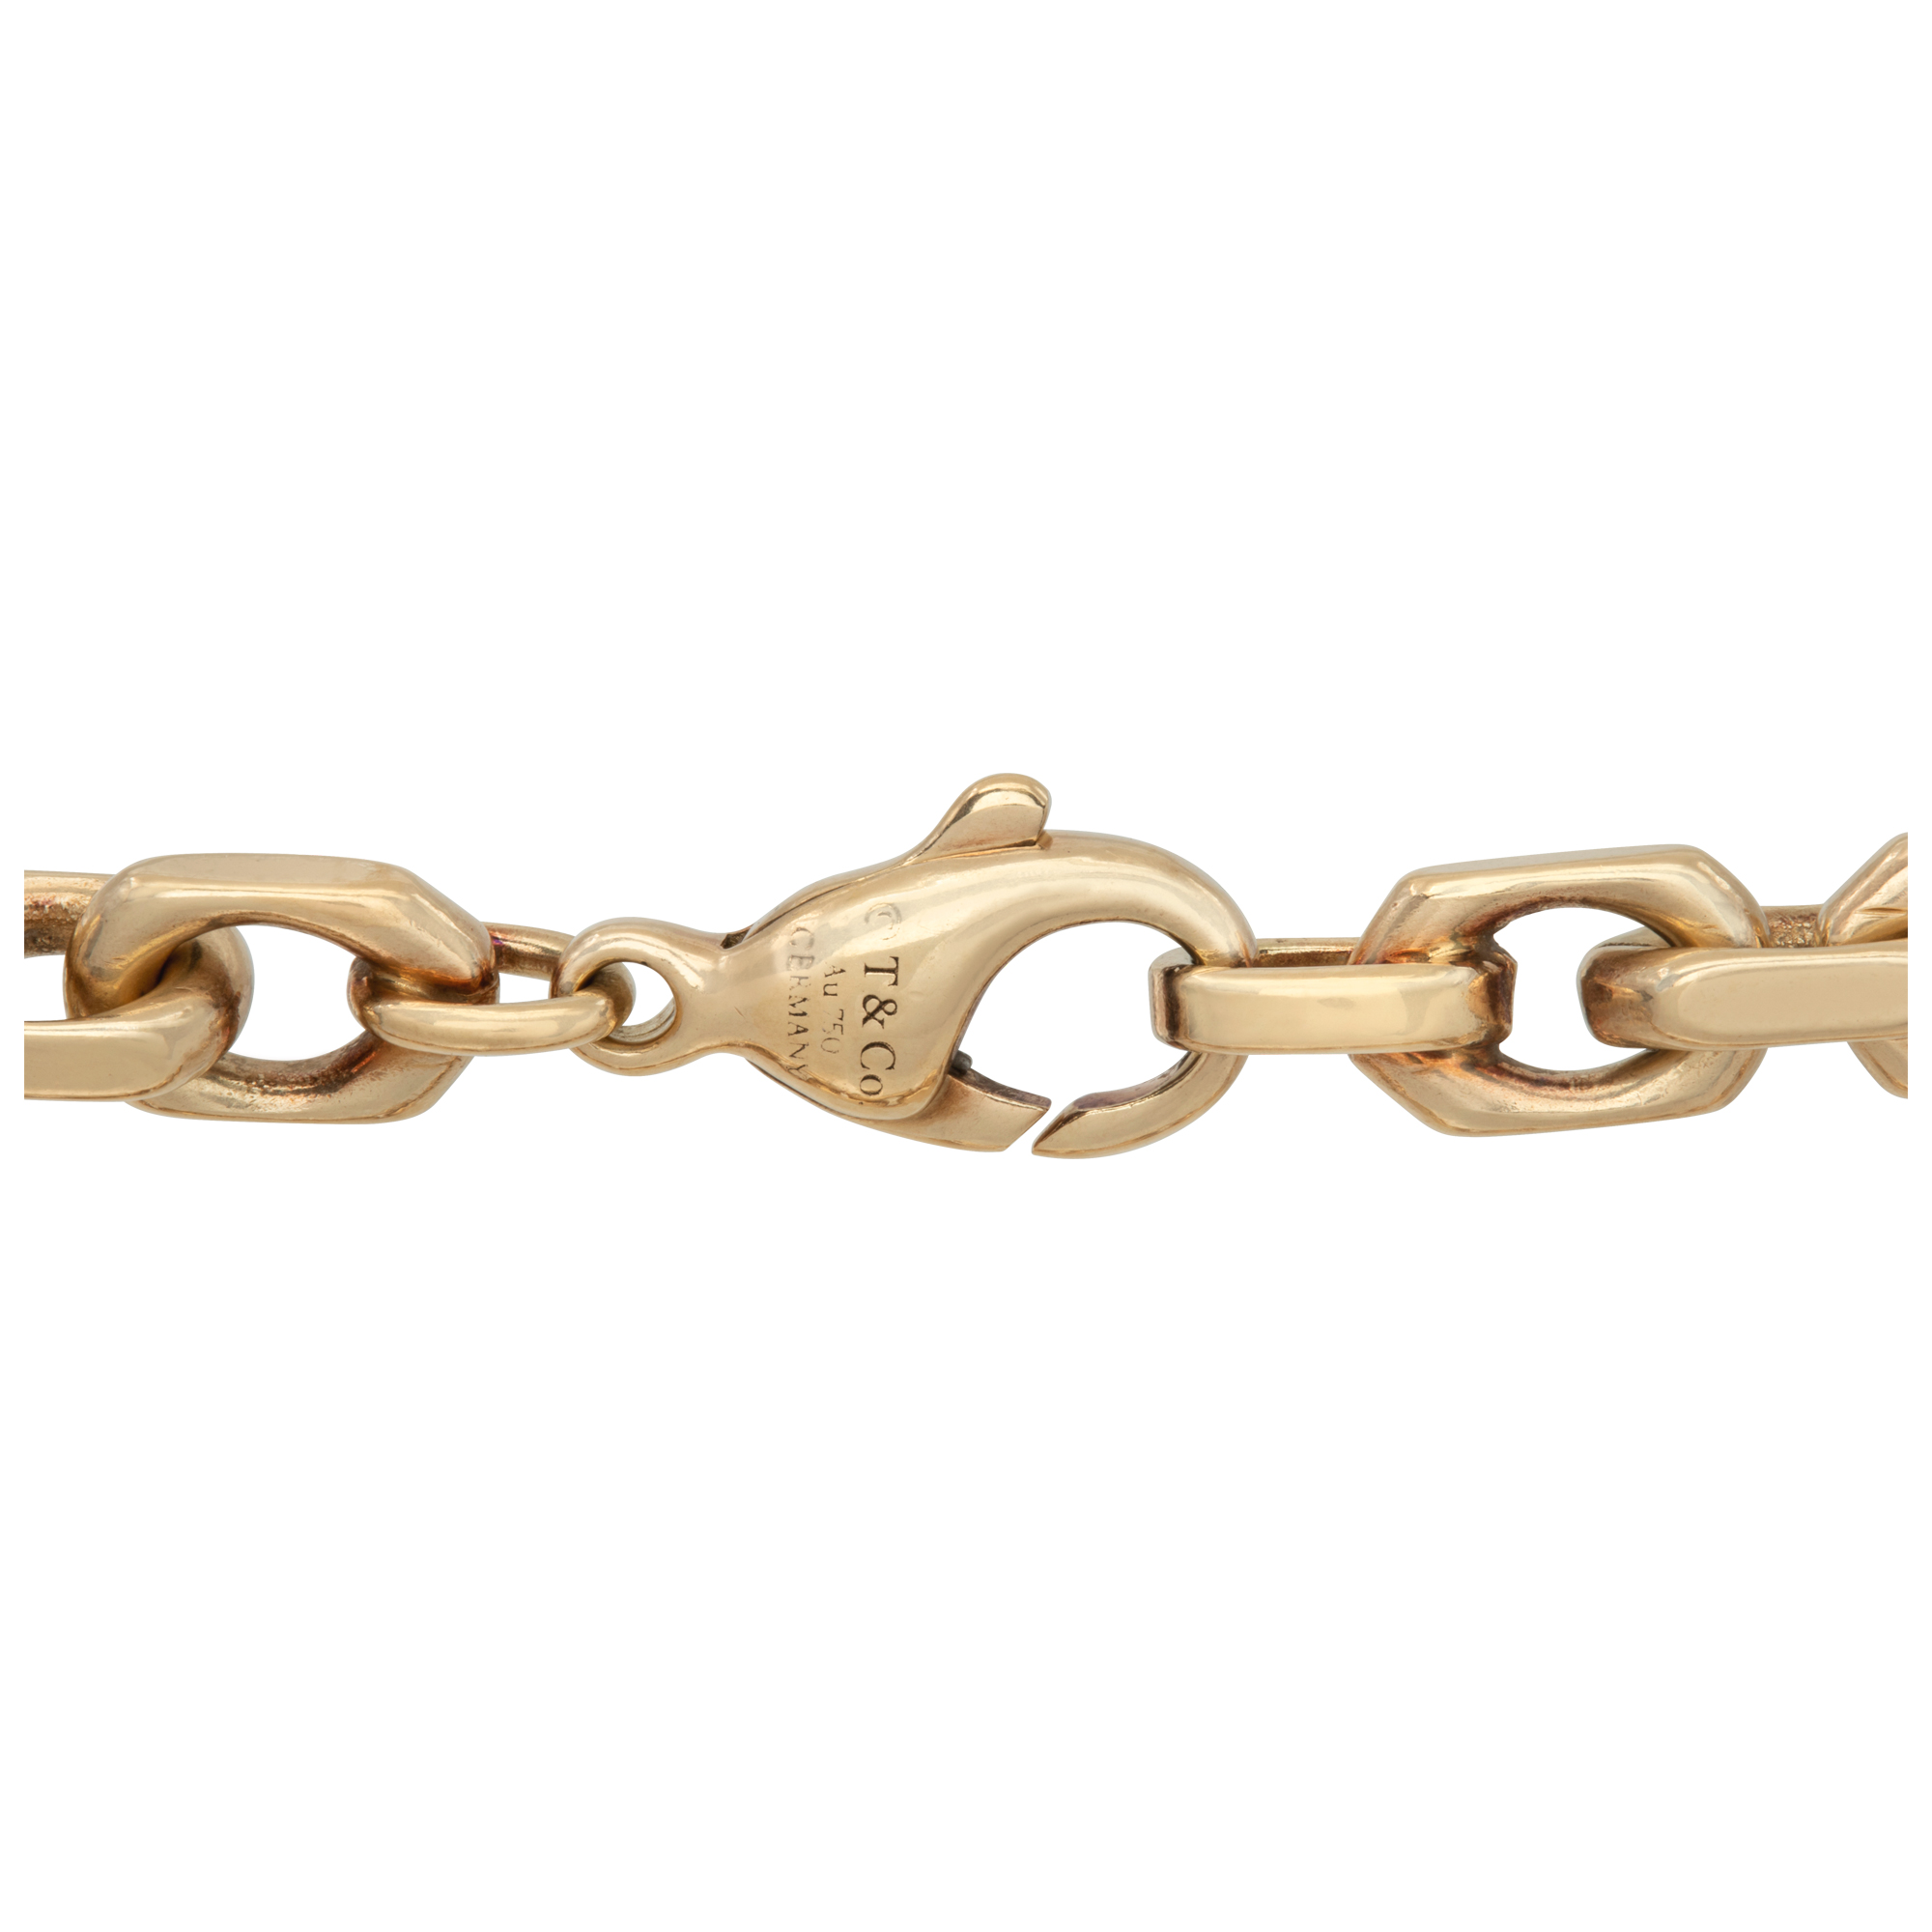 Tiffany and Co. link bracelet in 18k yellow gold. Measures 8.25 inches. image 2